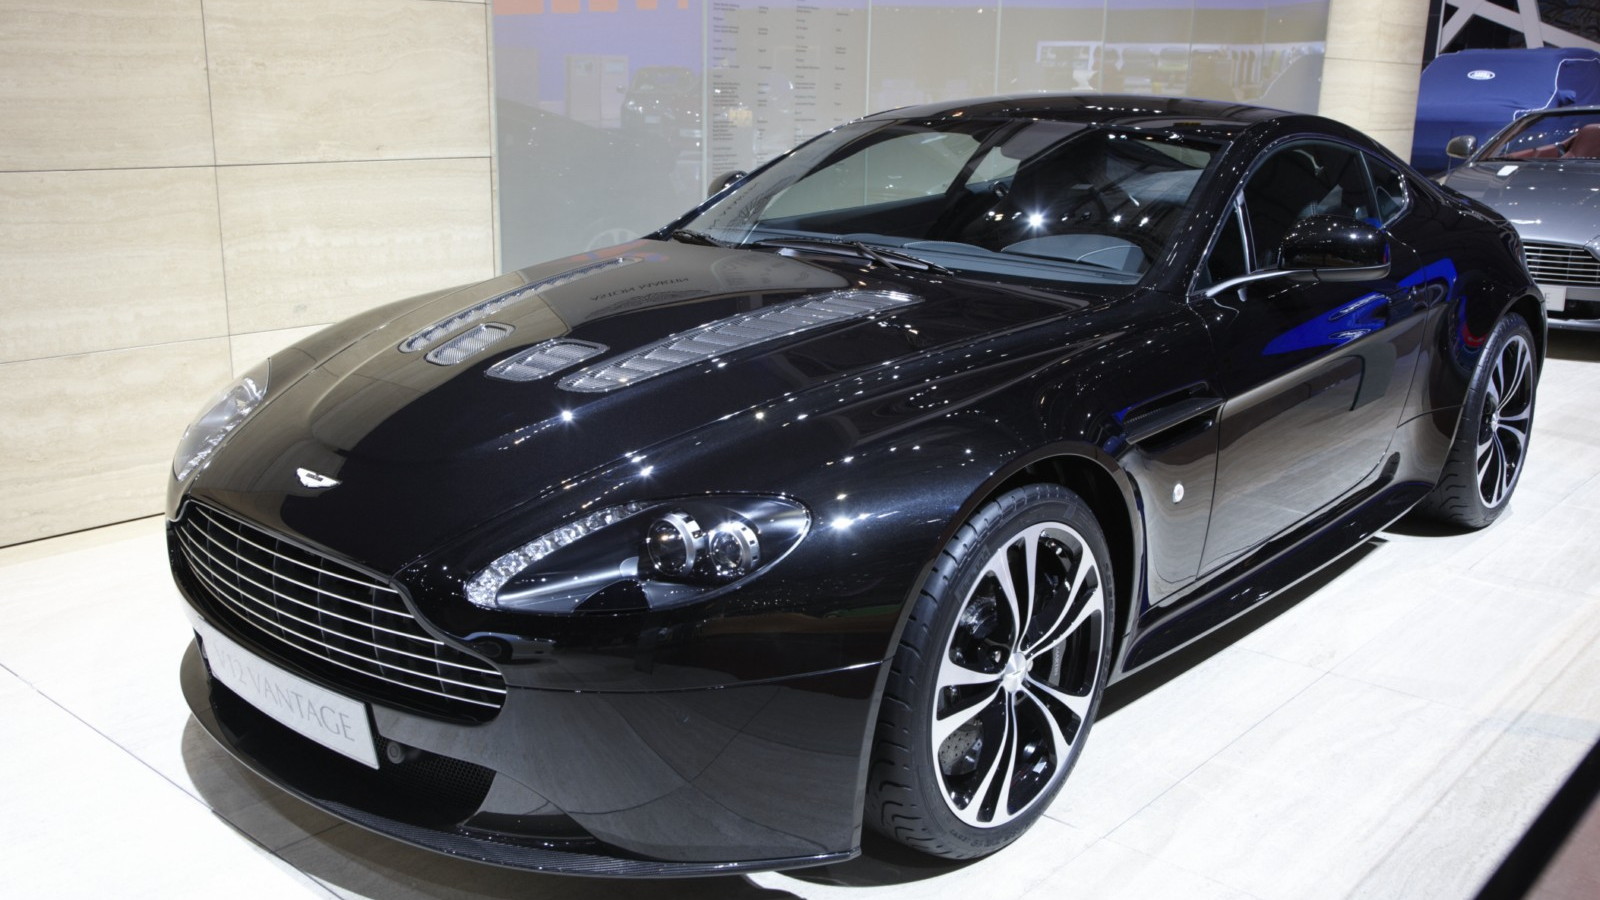 Aston Martin UB-2010 and Works Service Tailored at the 2010 Geneva Motor Show.